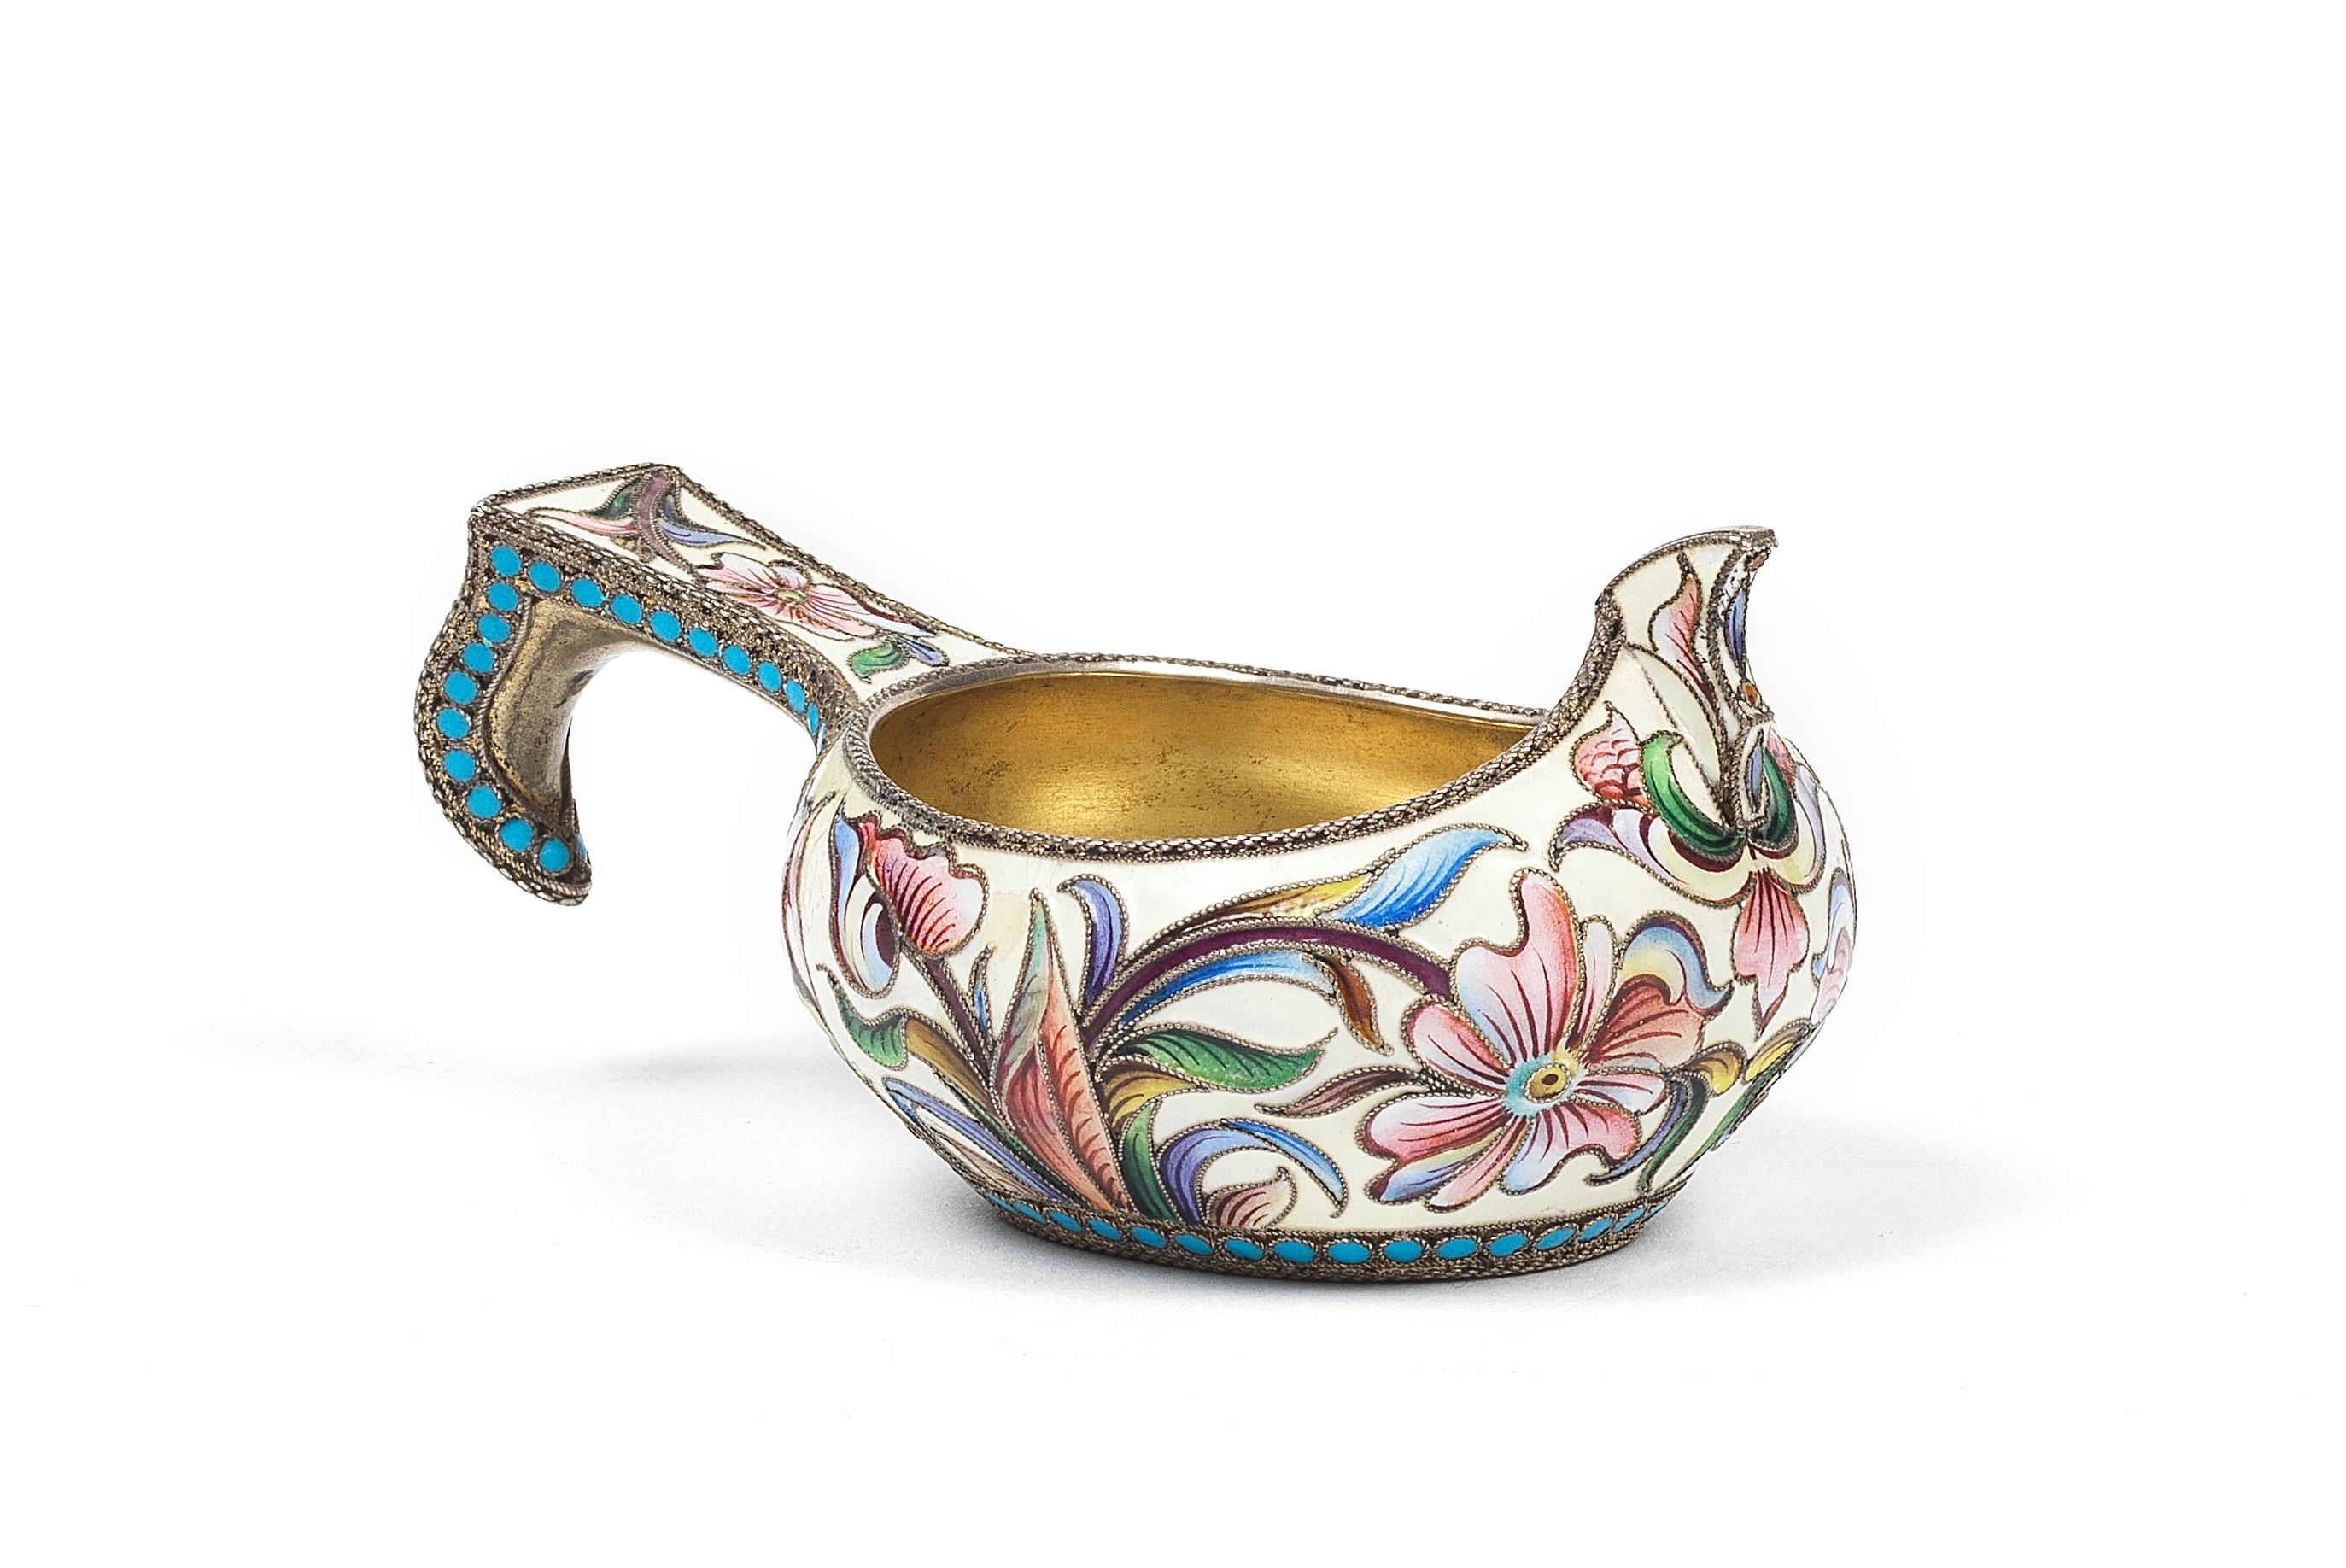 Sold at Auction: Russian Enamel Silver Gilt Kovsh